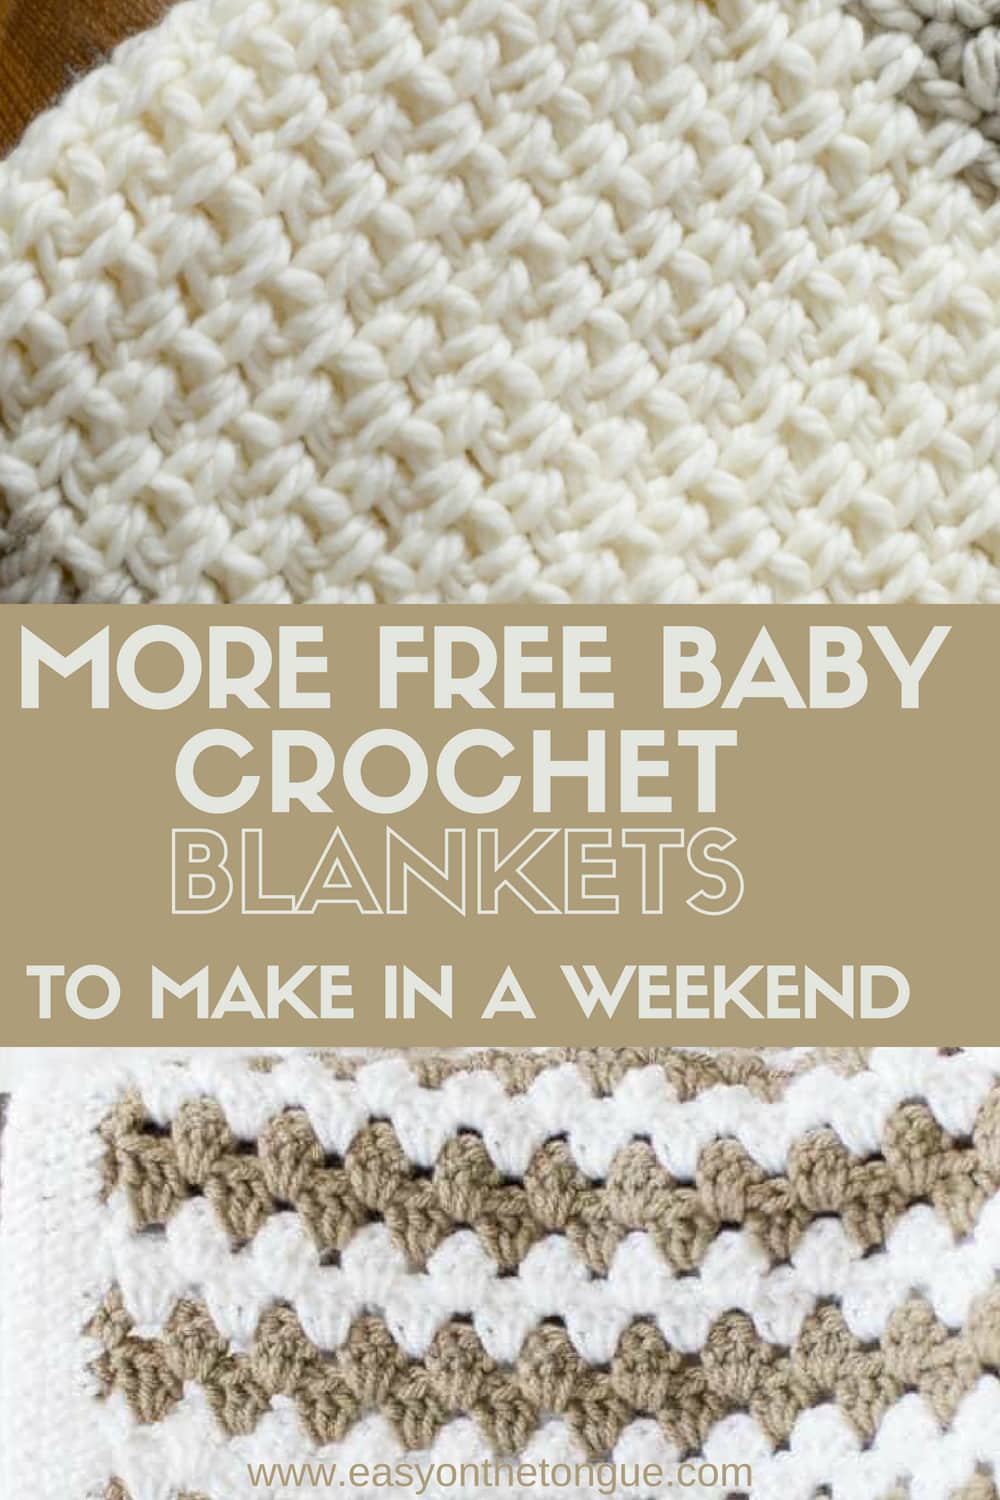 More Free Baby Crochet Blanket Patterns to do in a weekend